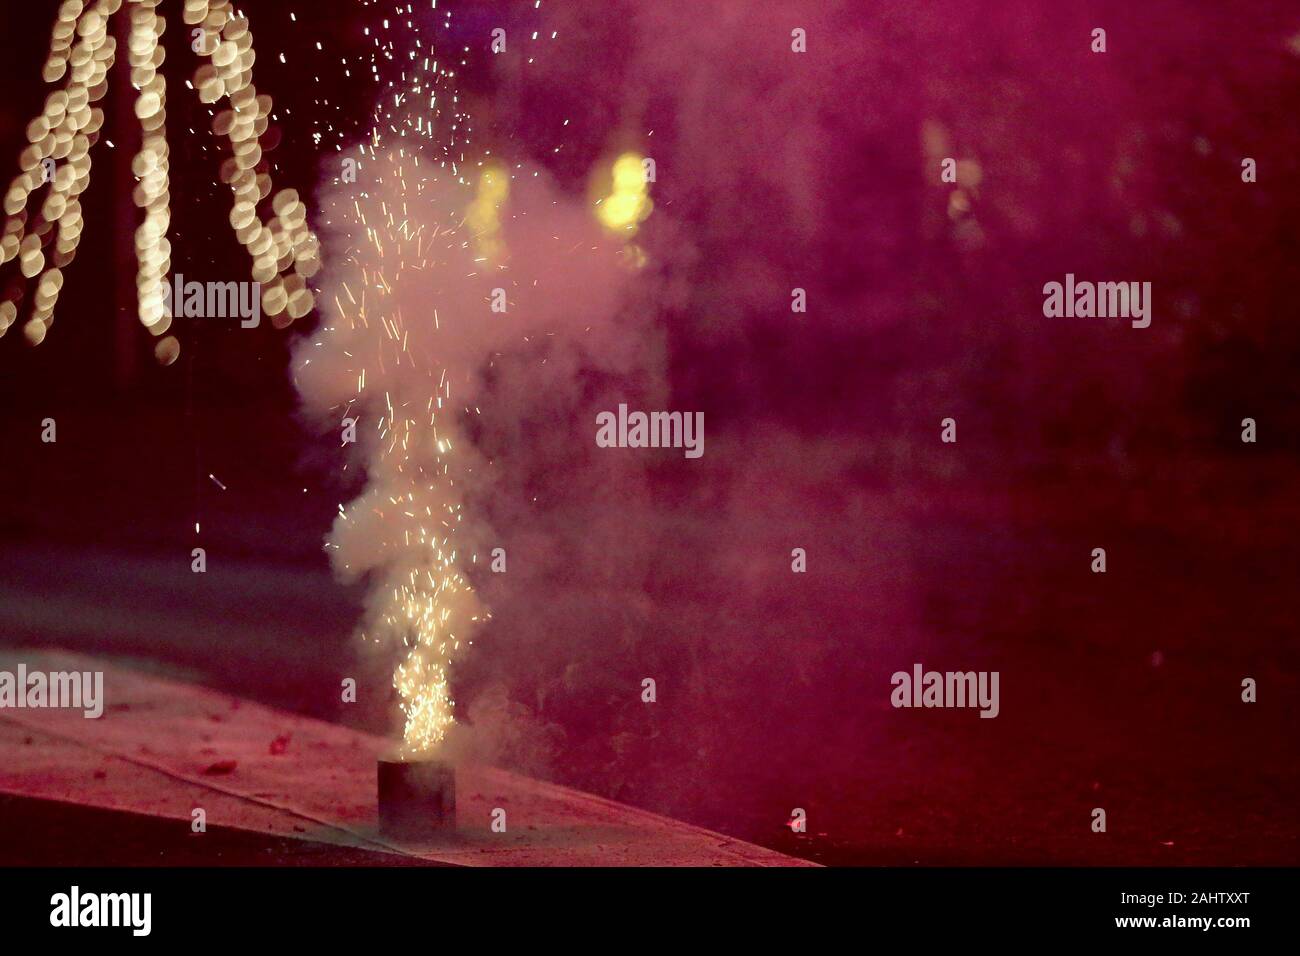 Eindhoven, Netherlands. 01st Jan, 2020. EINDHOVEN, 31-12-2019, New Year 2020 Eindhoven. Young boys with fireworks/fire crackers. Cake battery fireworks Credit: Pro Shots/Alamy Live News Stock Photo